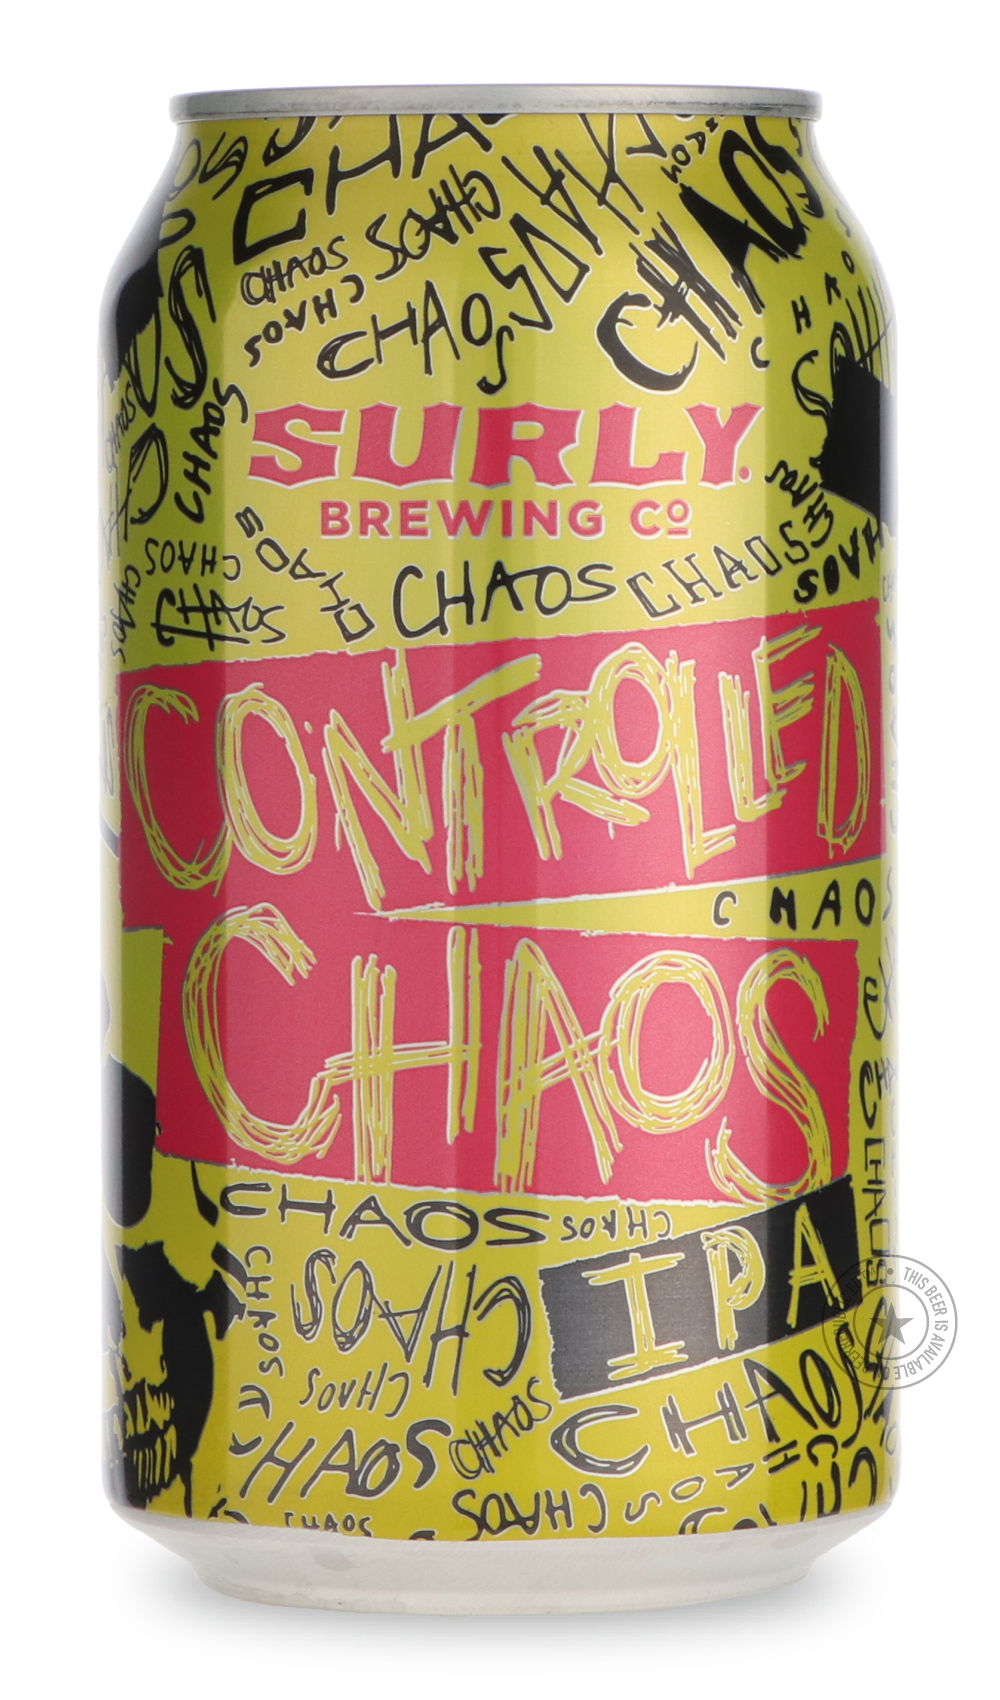 -Surly- Controlled Chaos-IPA- Only @ Beer Republic - The best online beer store for American & Canadian craft beer - Buy beer online from the USA and Canada - Bier online kopen - Amerikaans bier kopen - Craft beer store - Craft beer kopen - Amerikanisch bier kaufen - Bier online kaufen - Acheter biere online - IPA - Stout - Porter - New England IPA - Hazy IPA - Imperial Stout - Barrel Aged - Barrel Aged Imperial Stout - Brown - Dark beer - Blond - Blonde - Pilsner - Lager - Wheat - Weizen - Amber - Barley W